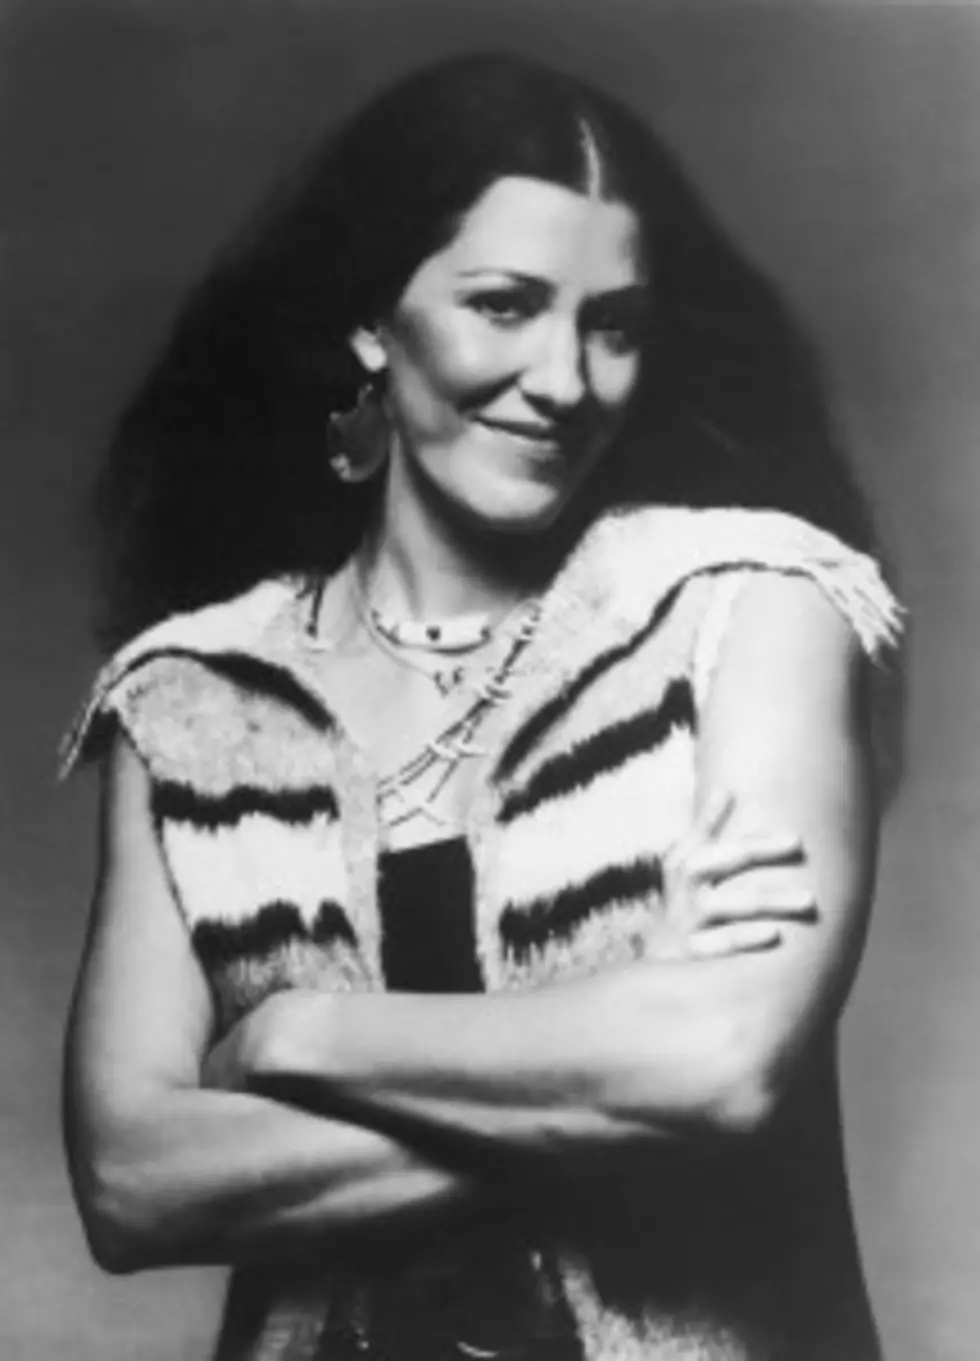 &#8220;Your Love Has Lifted Me Higher &#038; Higher&#8221; by Rita Coolidge is Rayman&#8217;s Song Of The Day [VIDEO]